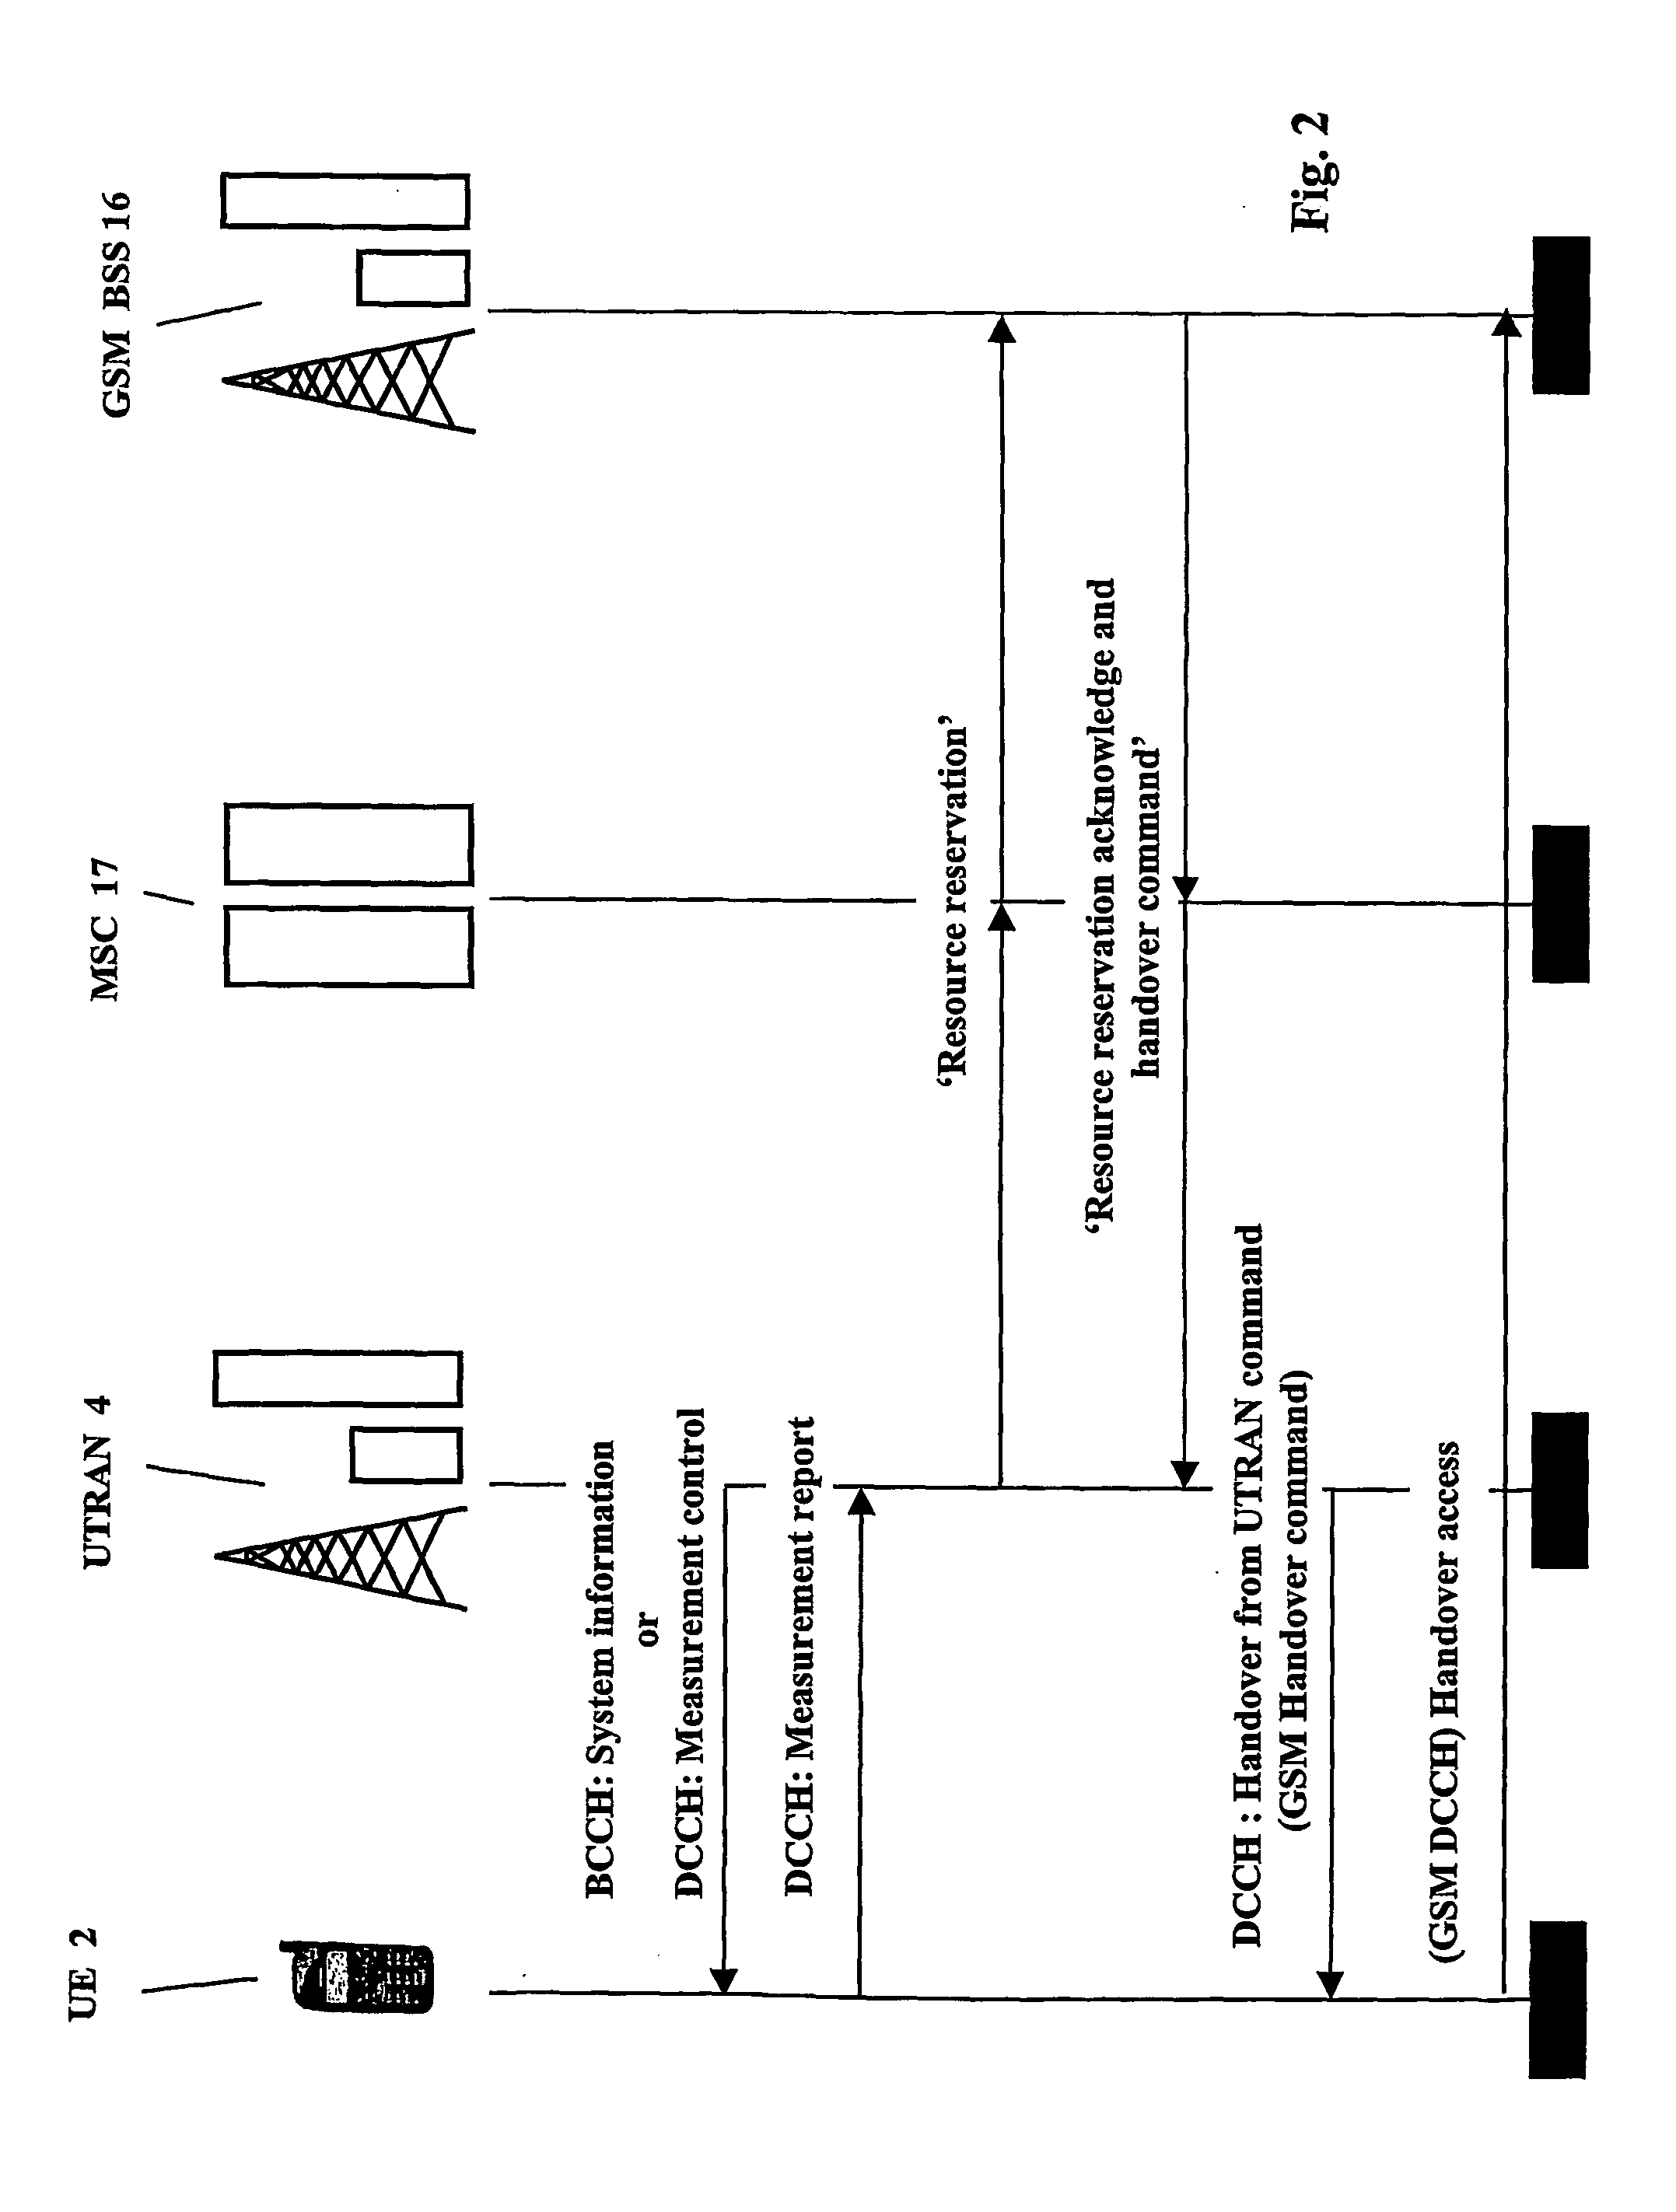 System and method for message redirection between mobile telecommunication networks with different radio access technologies